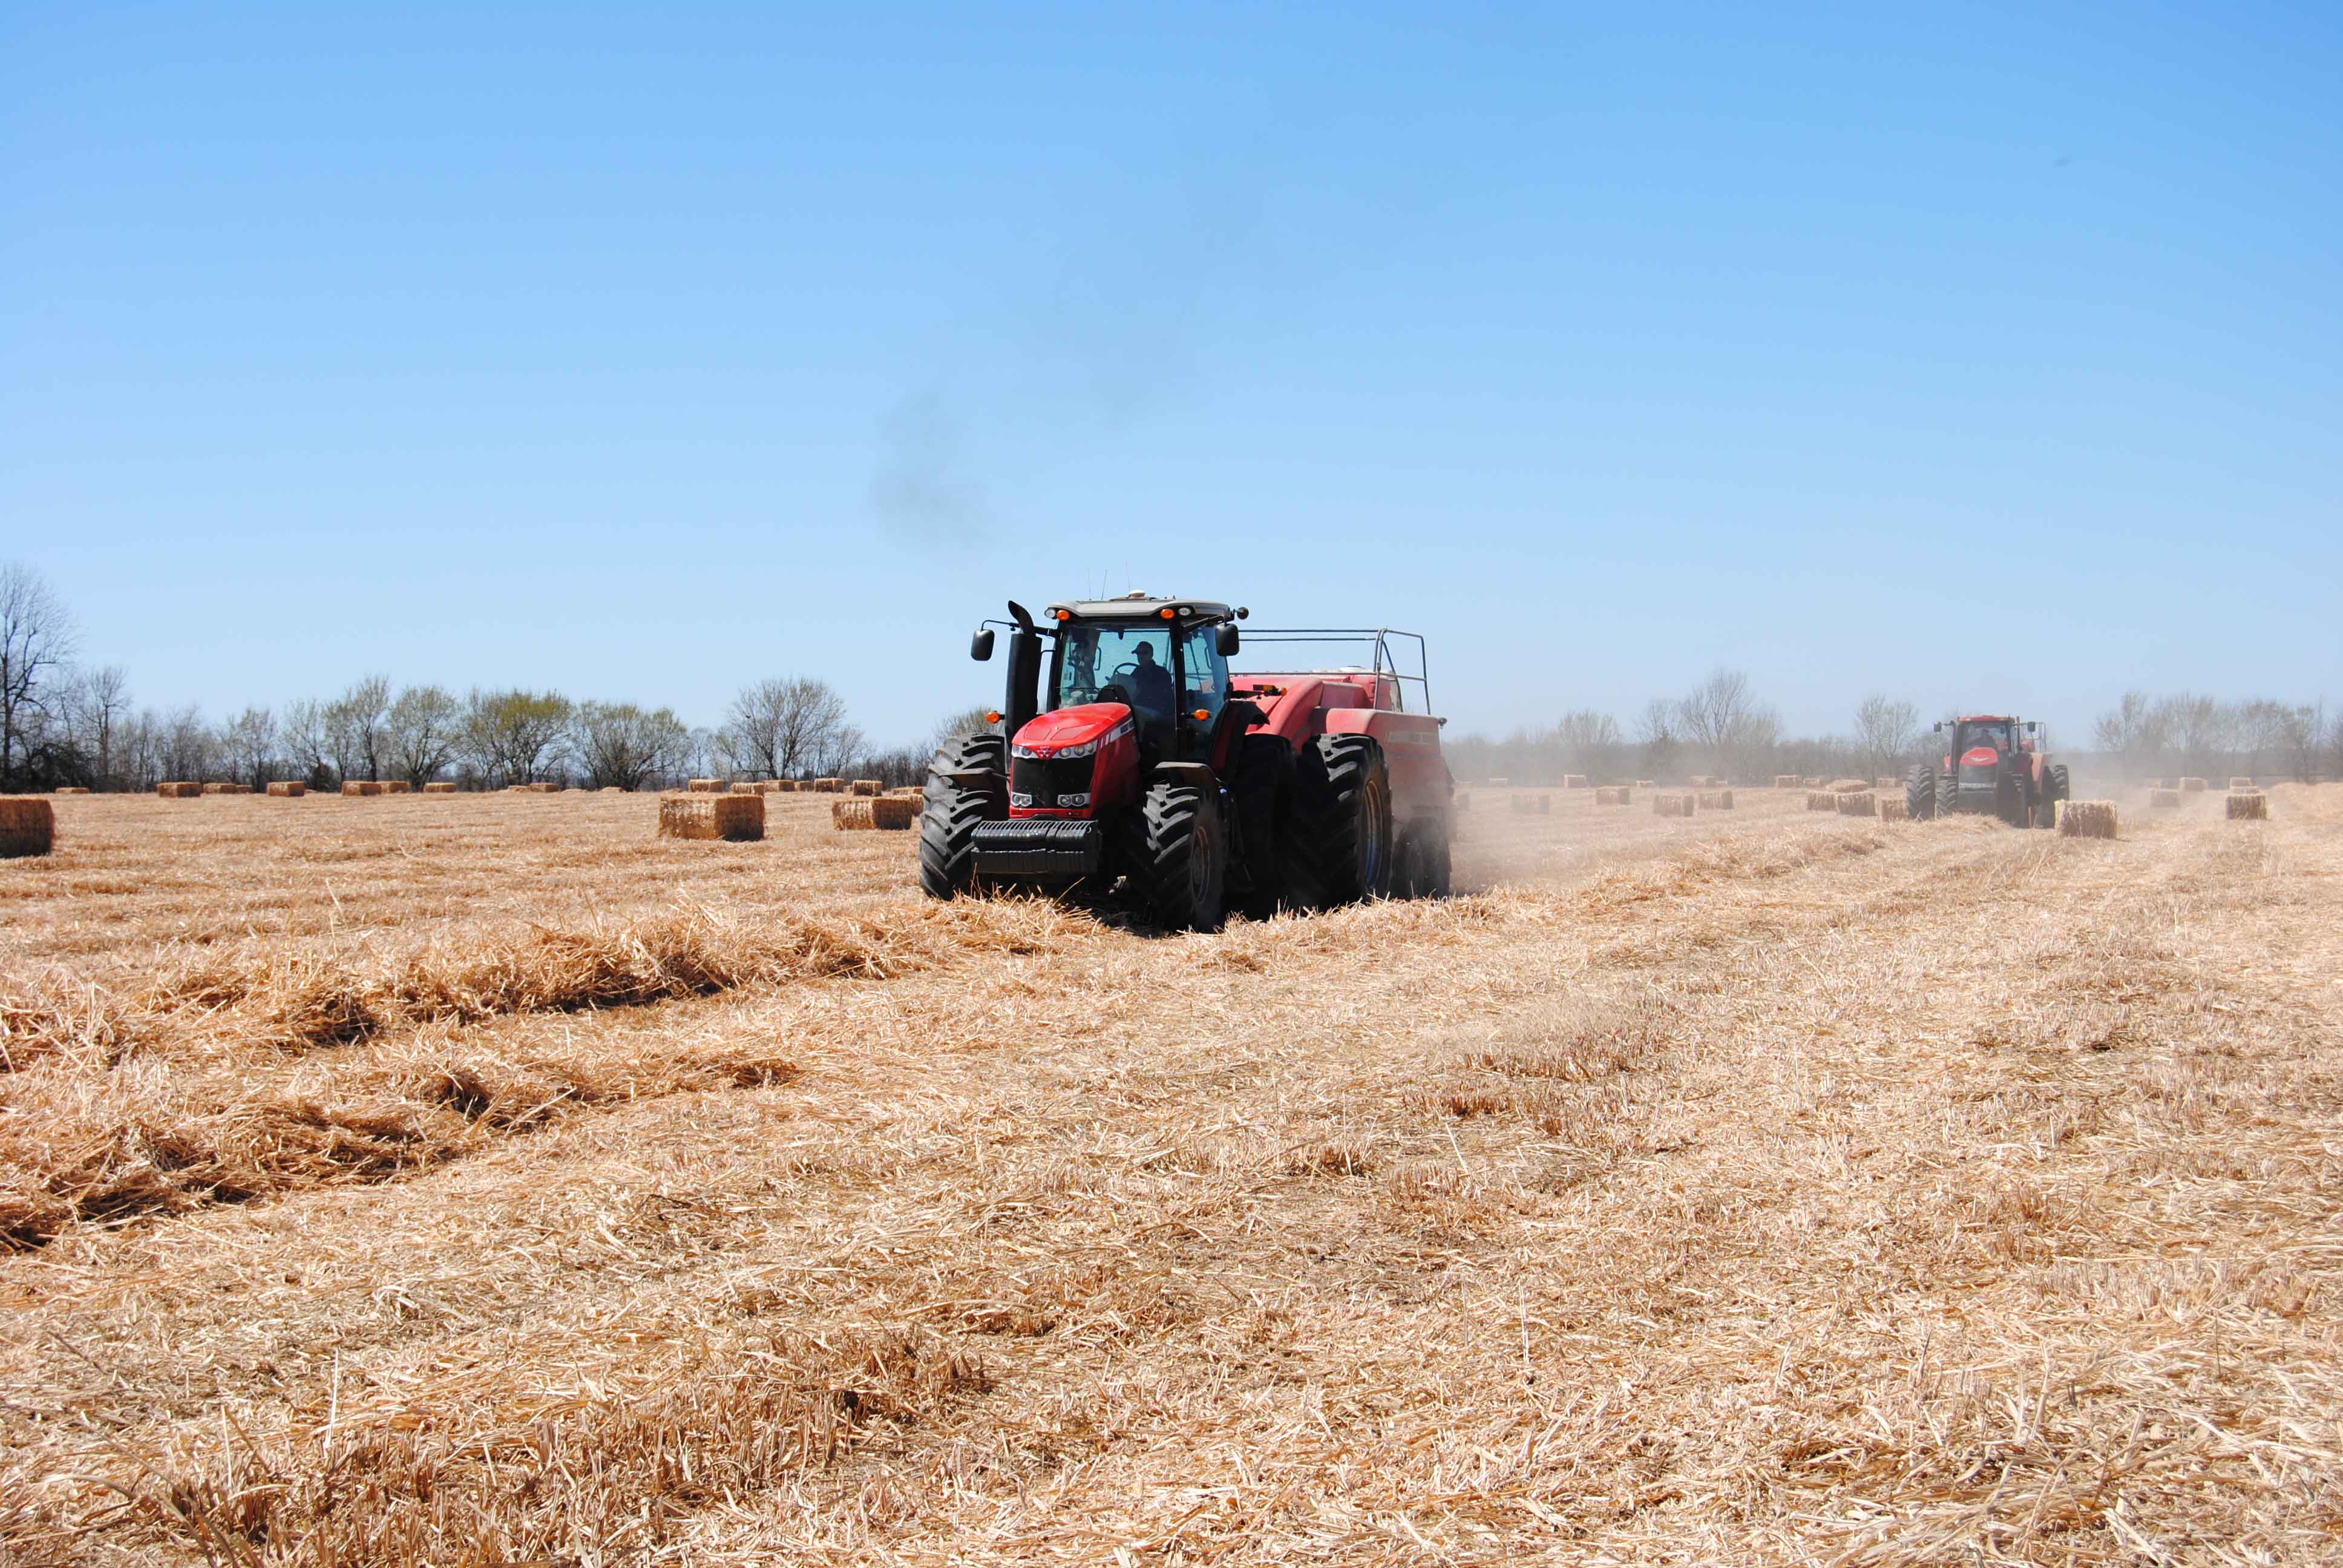 Miscanthus harvest offers financial benefits for Missouri farmers